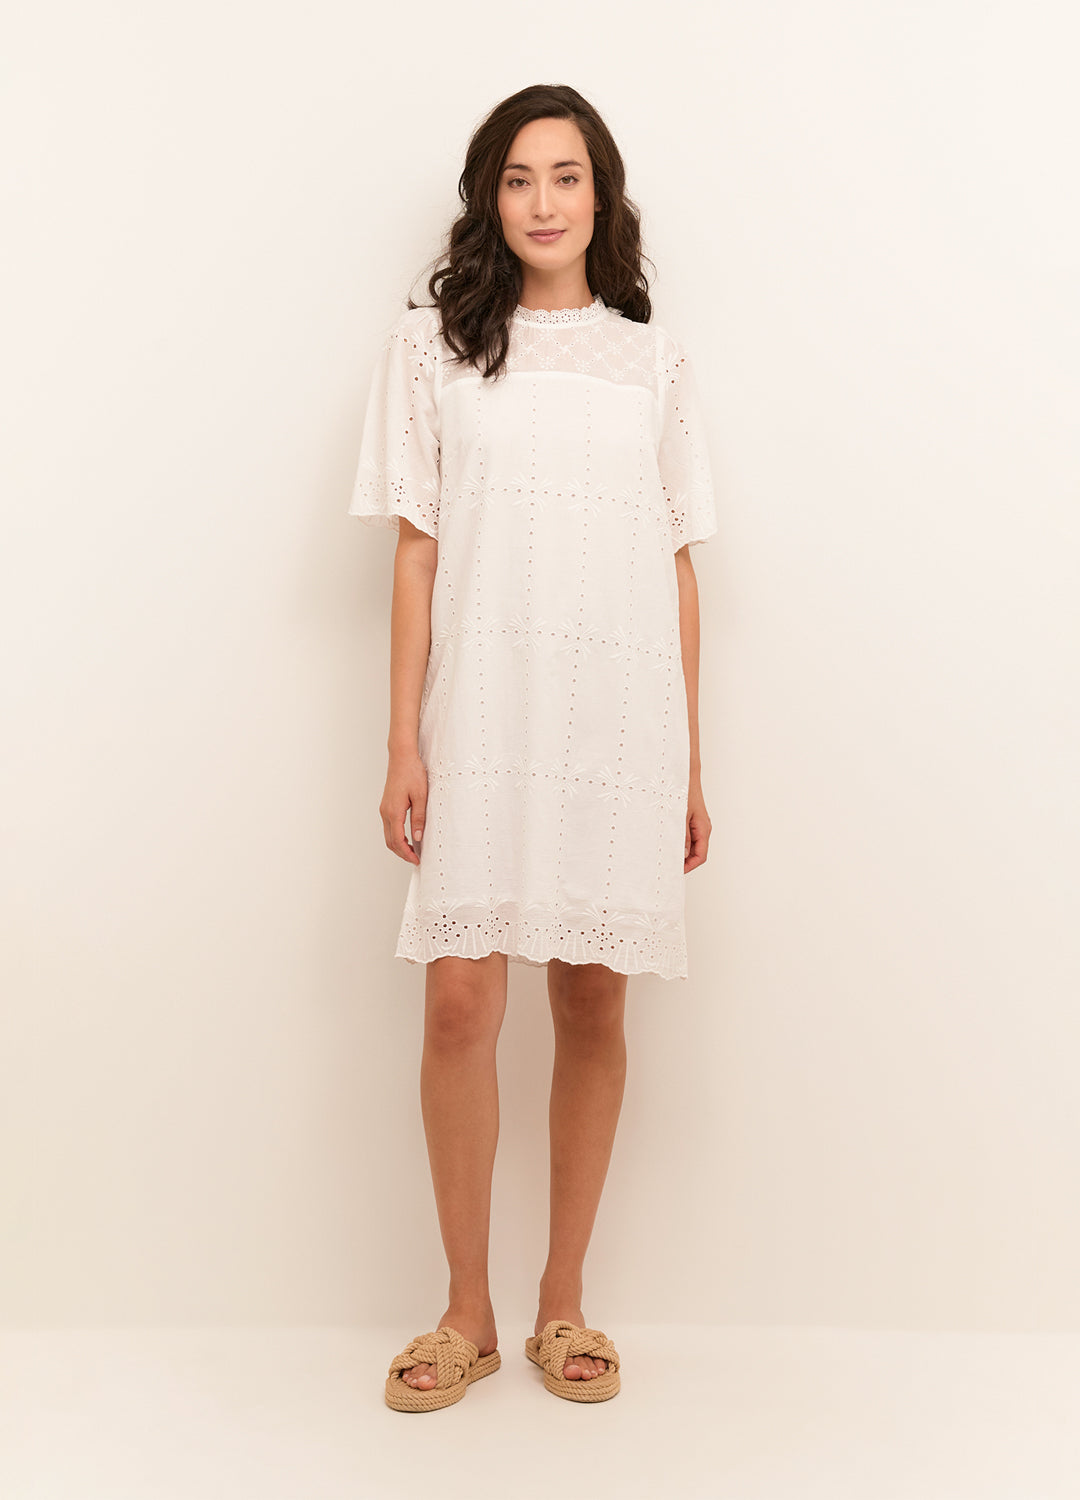 Full view of the Cream Clothing Denmark Moccamia Dress in Snow White cotton with eyelet detailing at Inner Beach Co, Toronto, Ontario, Canada